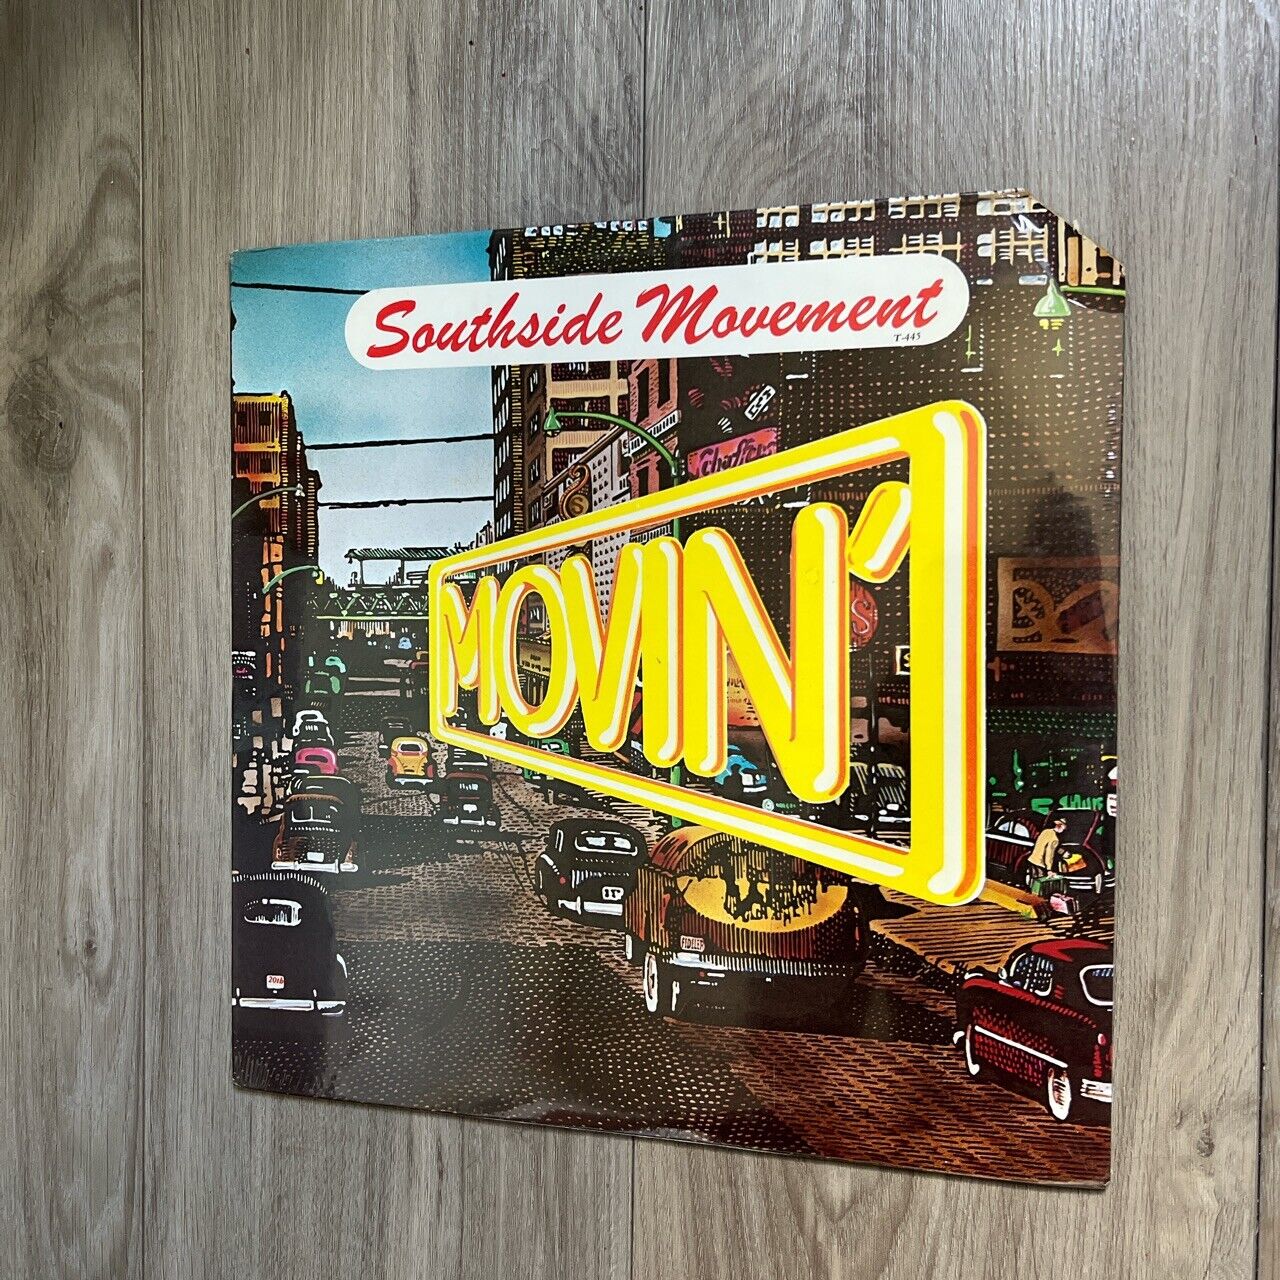 Southside Movement -  Movin\' - 20th Century Records Vintage 1974 Blues Jazz Funk